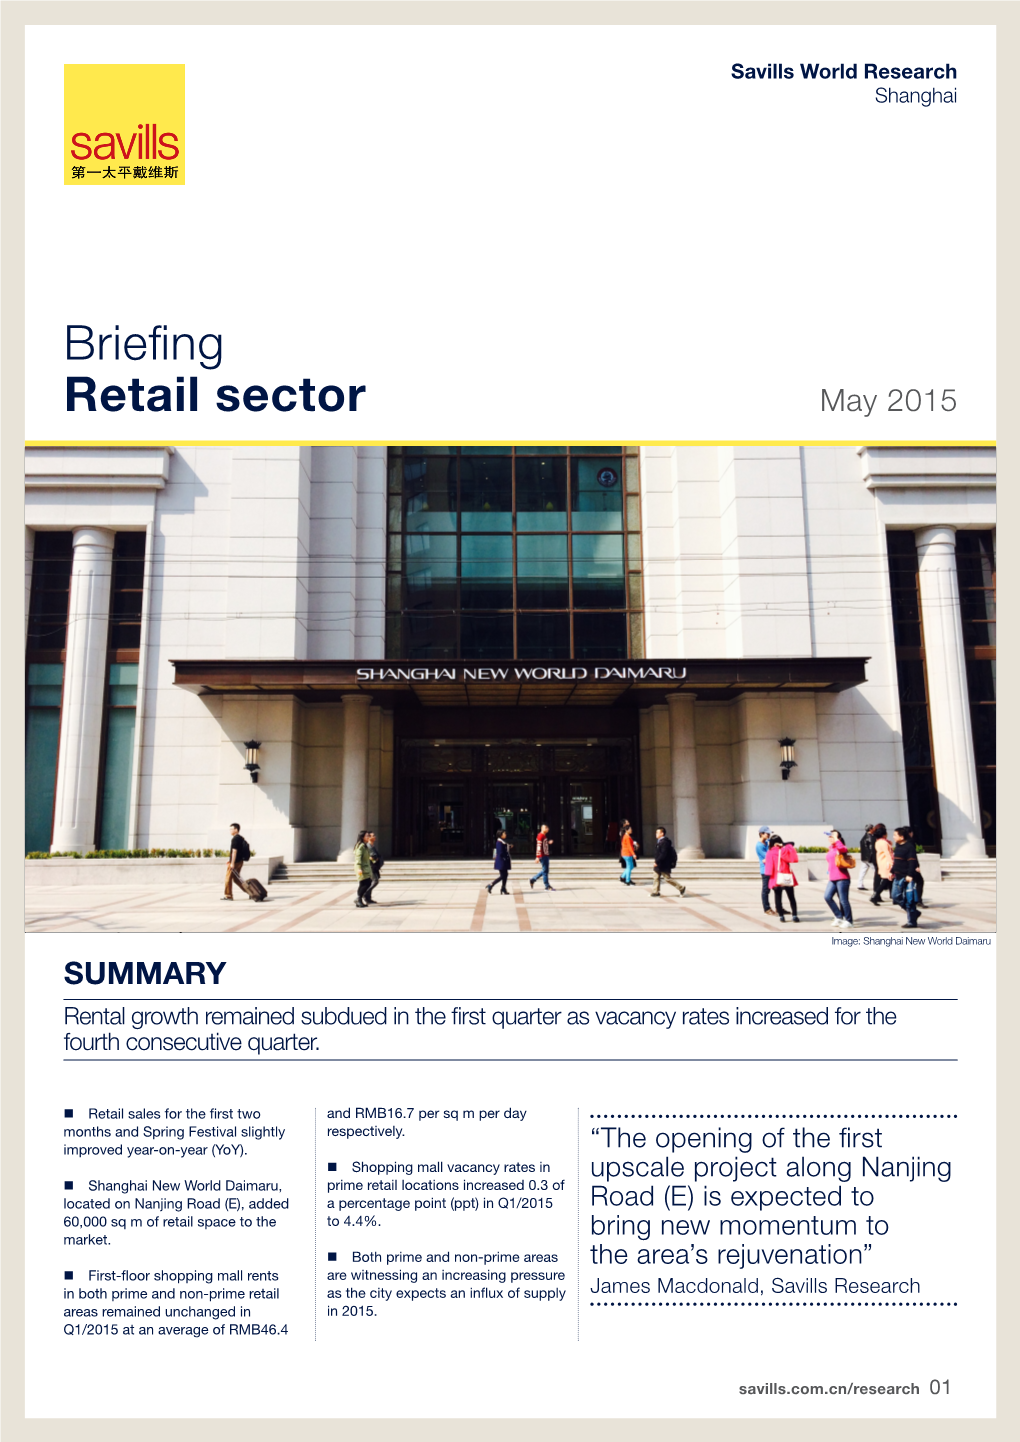 Briefing Retail Sector May 2015